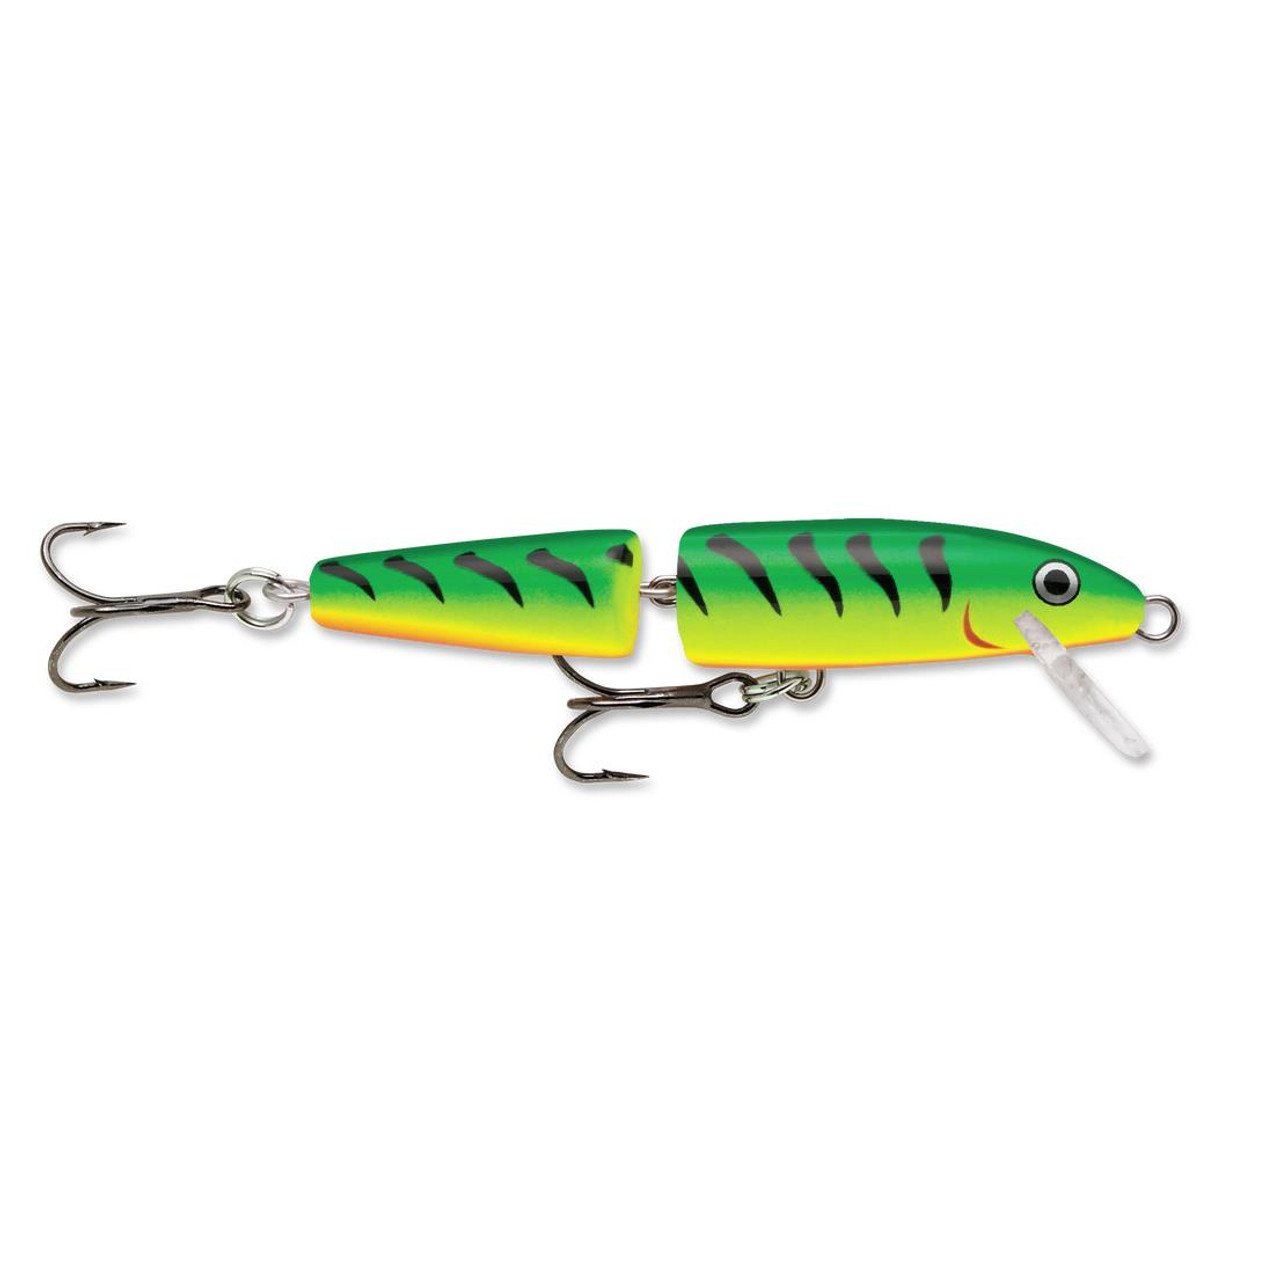 https://cdn11.bigcommerce.com/s-70mih4s/images/stencil/1280x1280/products/5235/64759/Rapala-11-Original-Rapala-Jointed-Floating-Jerkbait-022677003504_image2__82953.1711564152.jpg?c=2